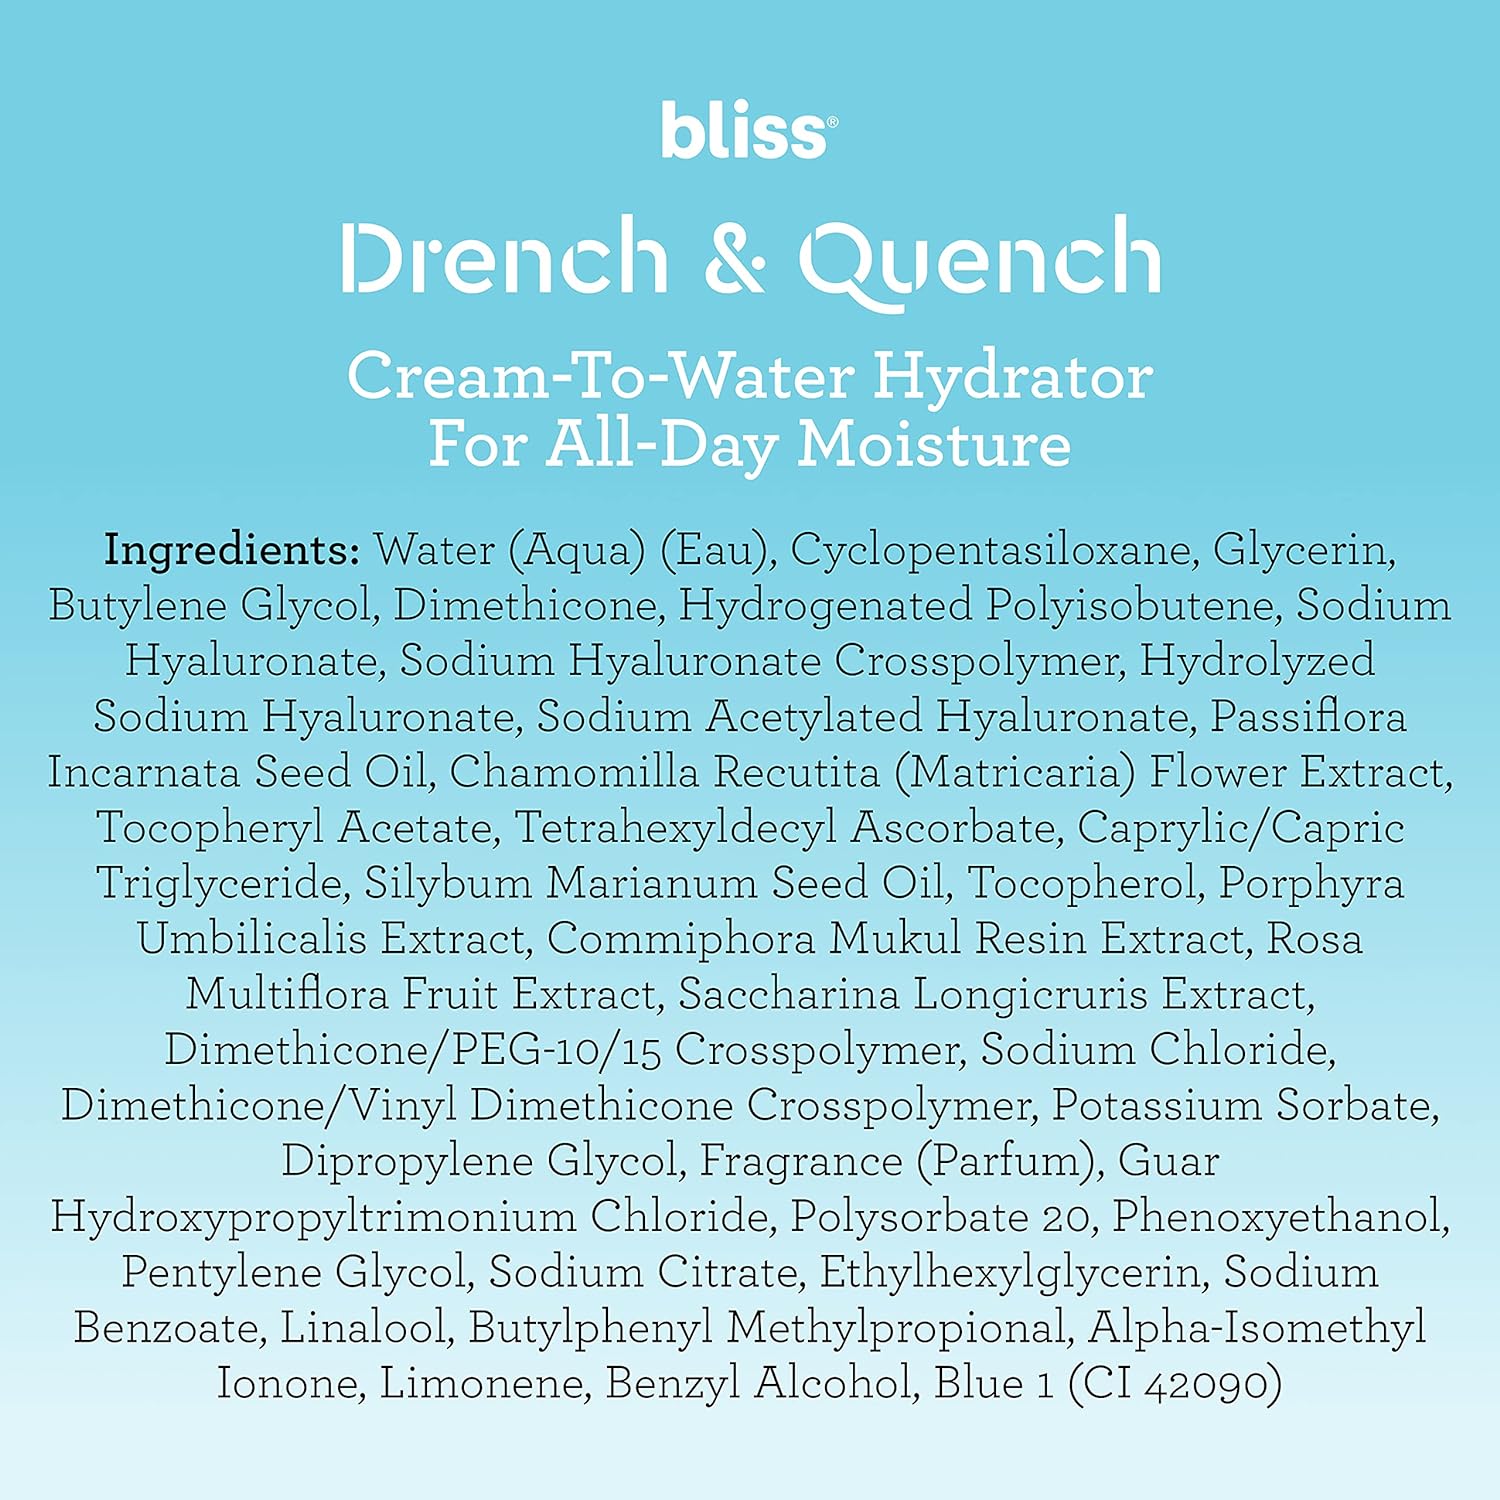 Bliss Drench & Quench Hyaluronic Acid Moisturizer for Face - 1 Fl Oz - Cream-To-Water - Hydrator for All-Day Moisture - Clean - Vegan & Cruelty-Free : Beauty & Personal Care